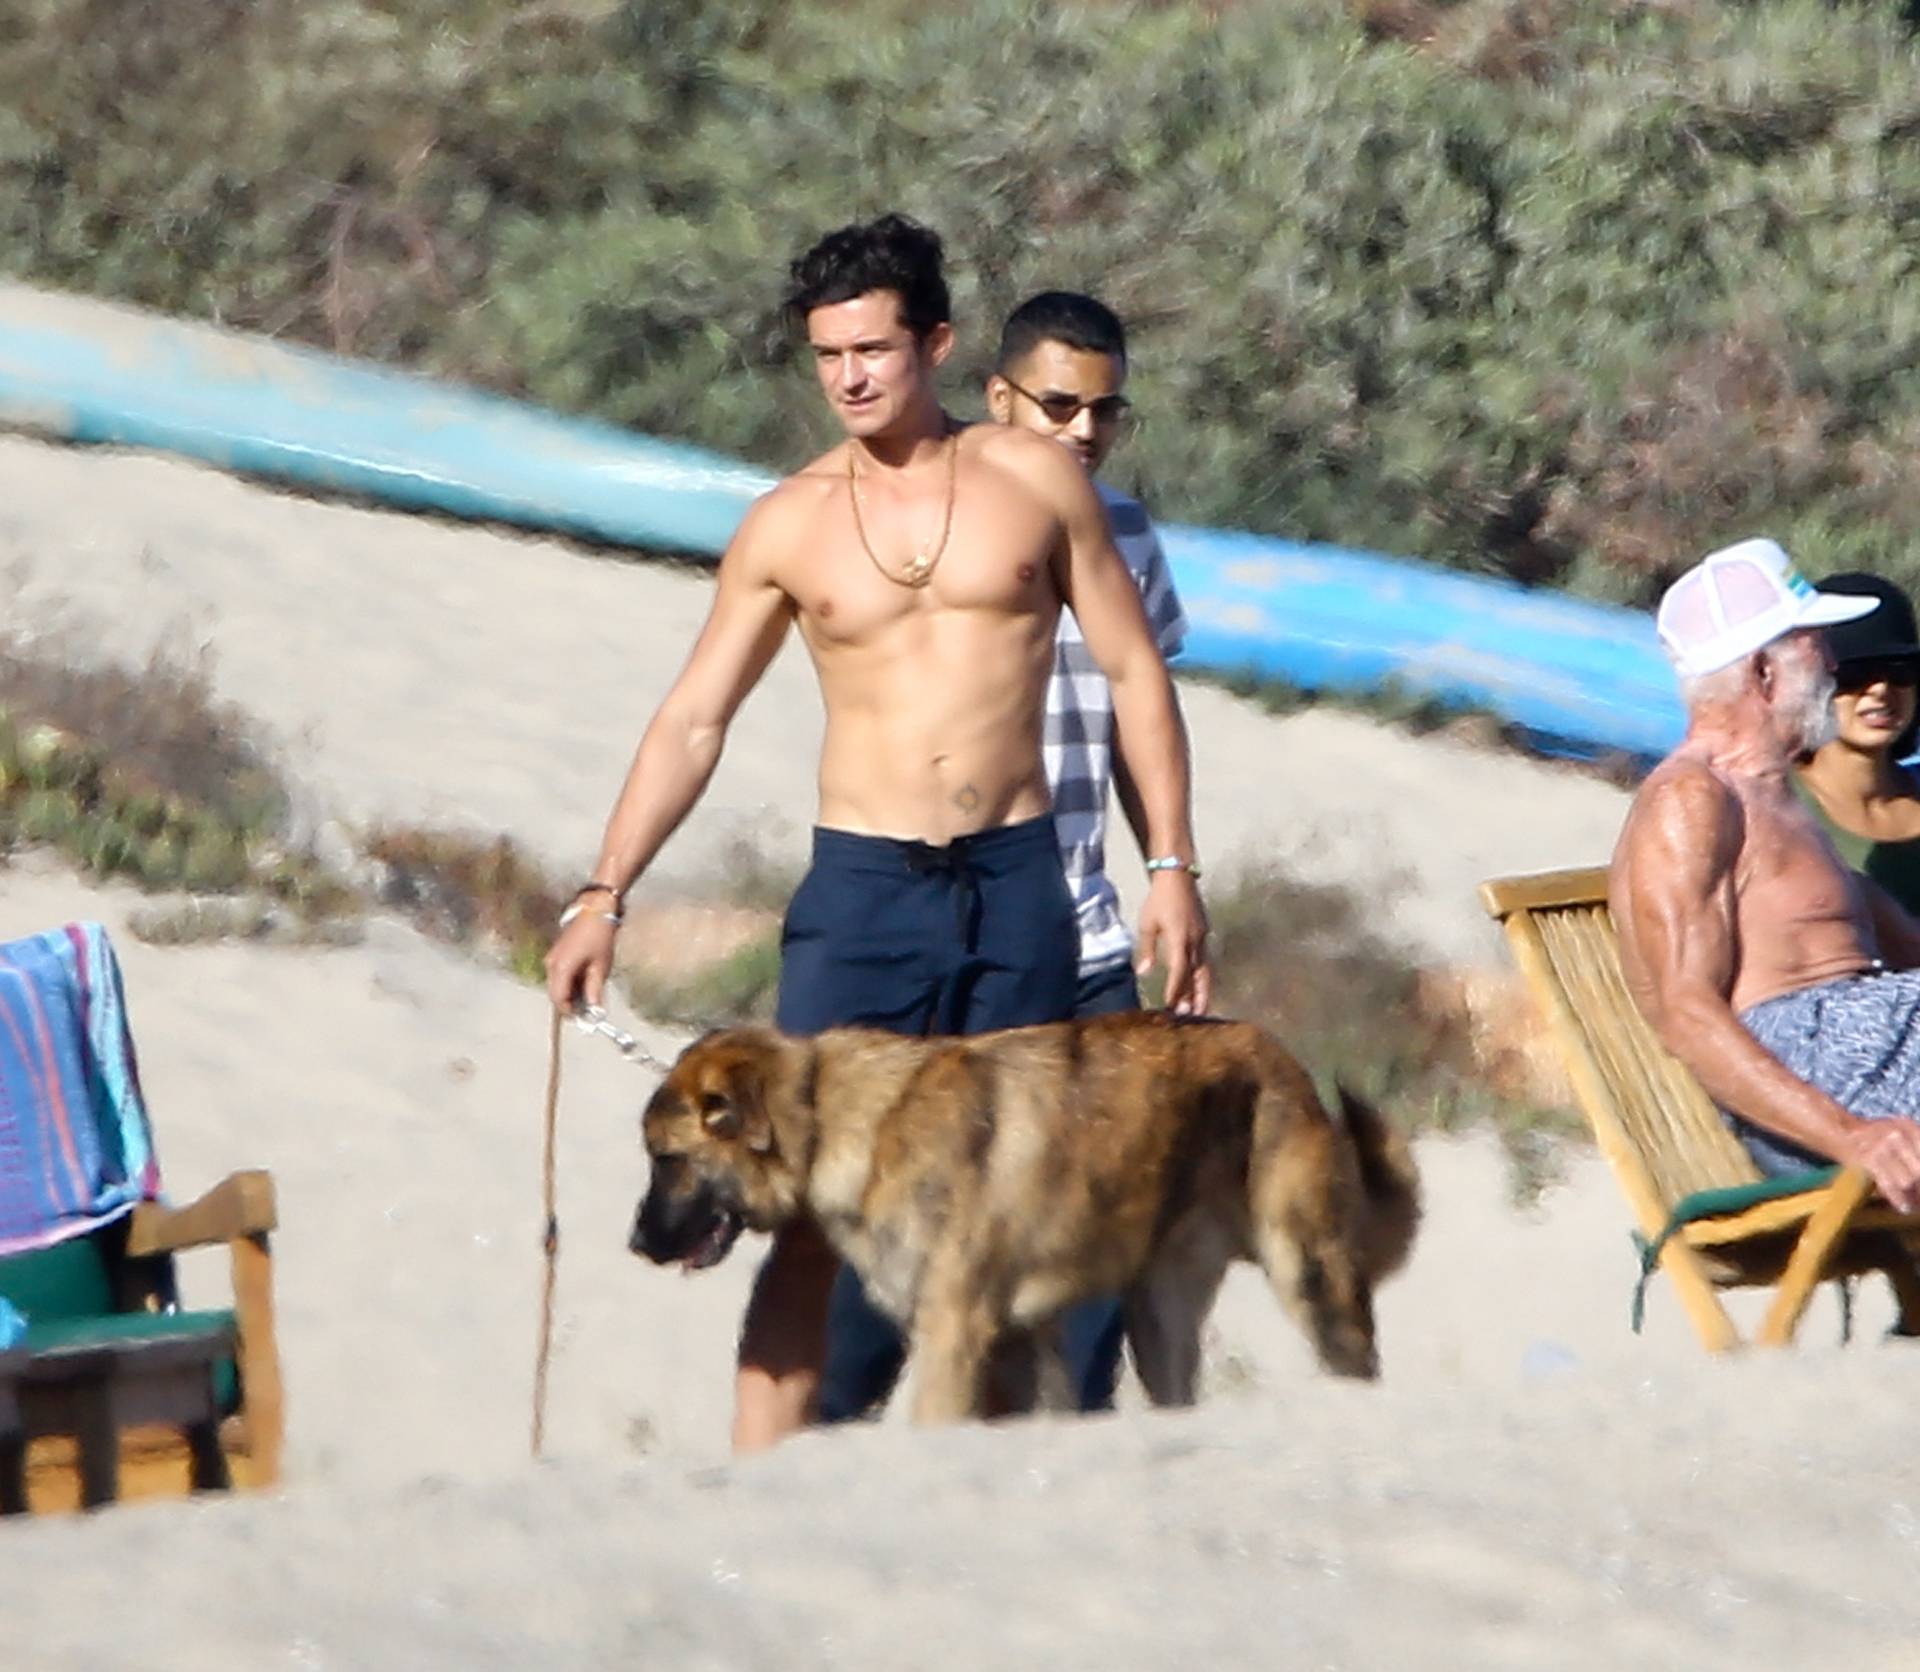 *PREMIUM EXCLUSIVE* Shirtless Orlando Bloom enjoys another sunny Beach Day in Malibu